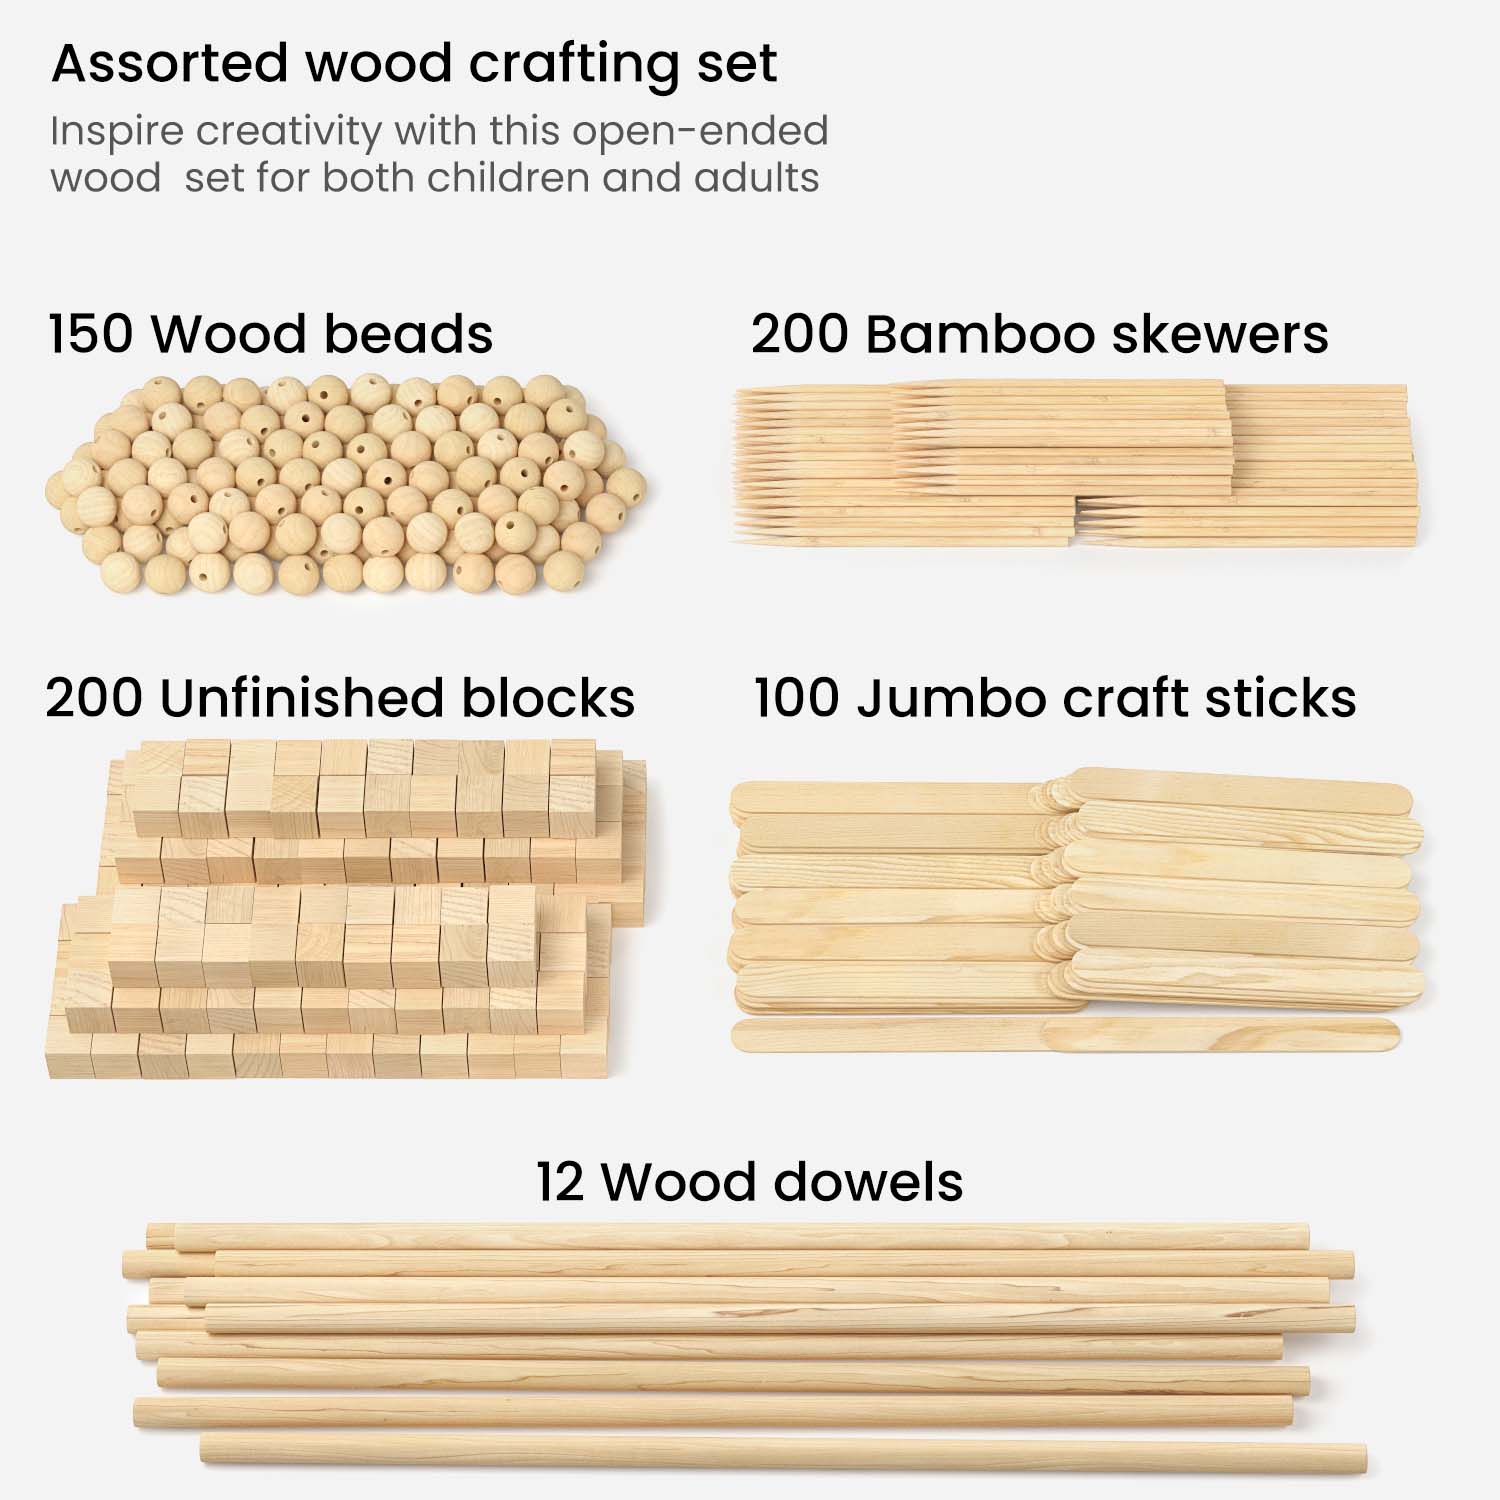 Assorted Wood Crafting Kit Contents